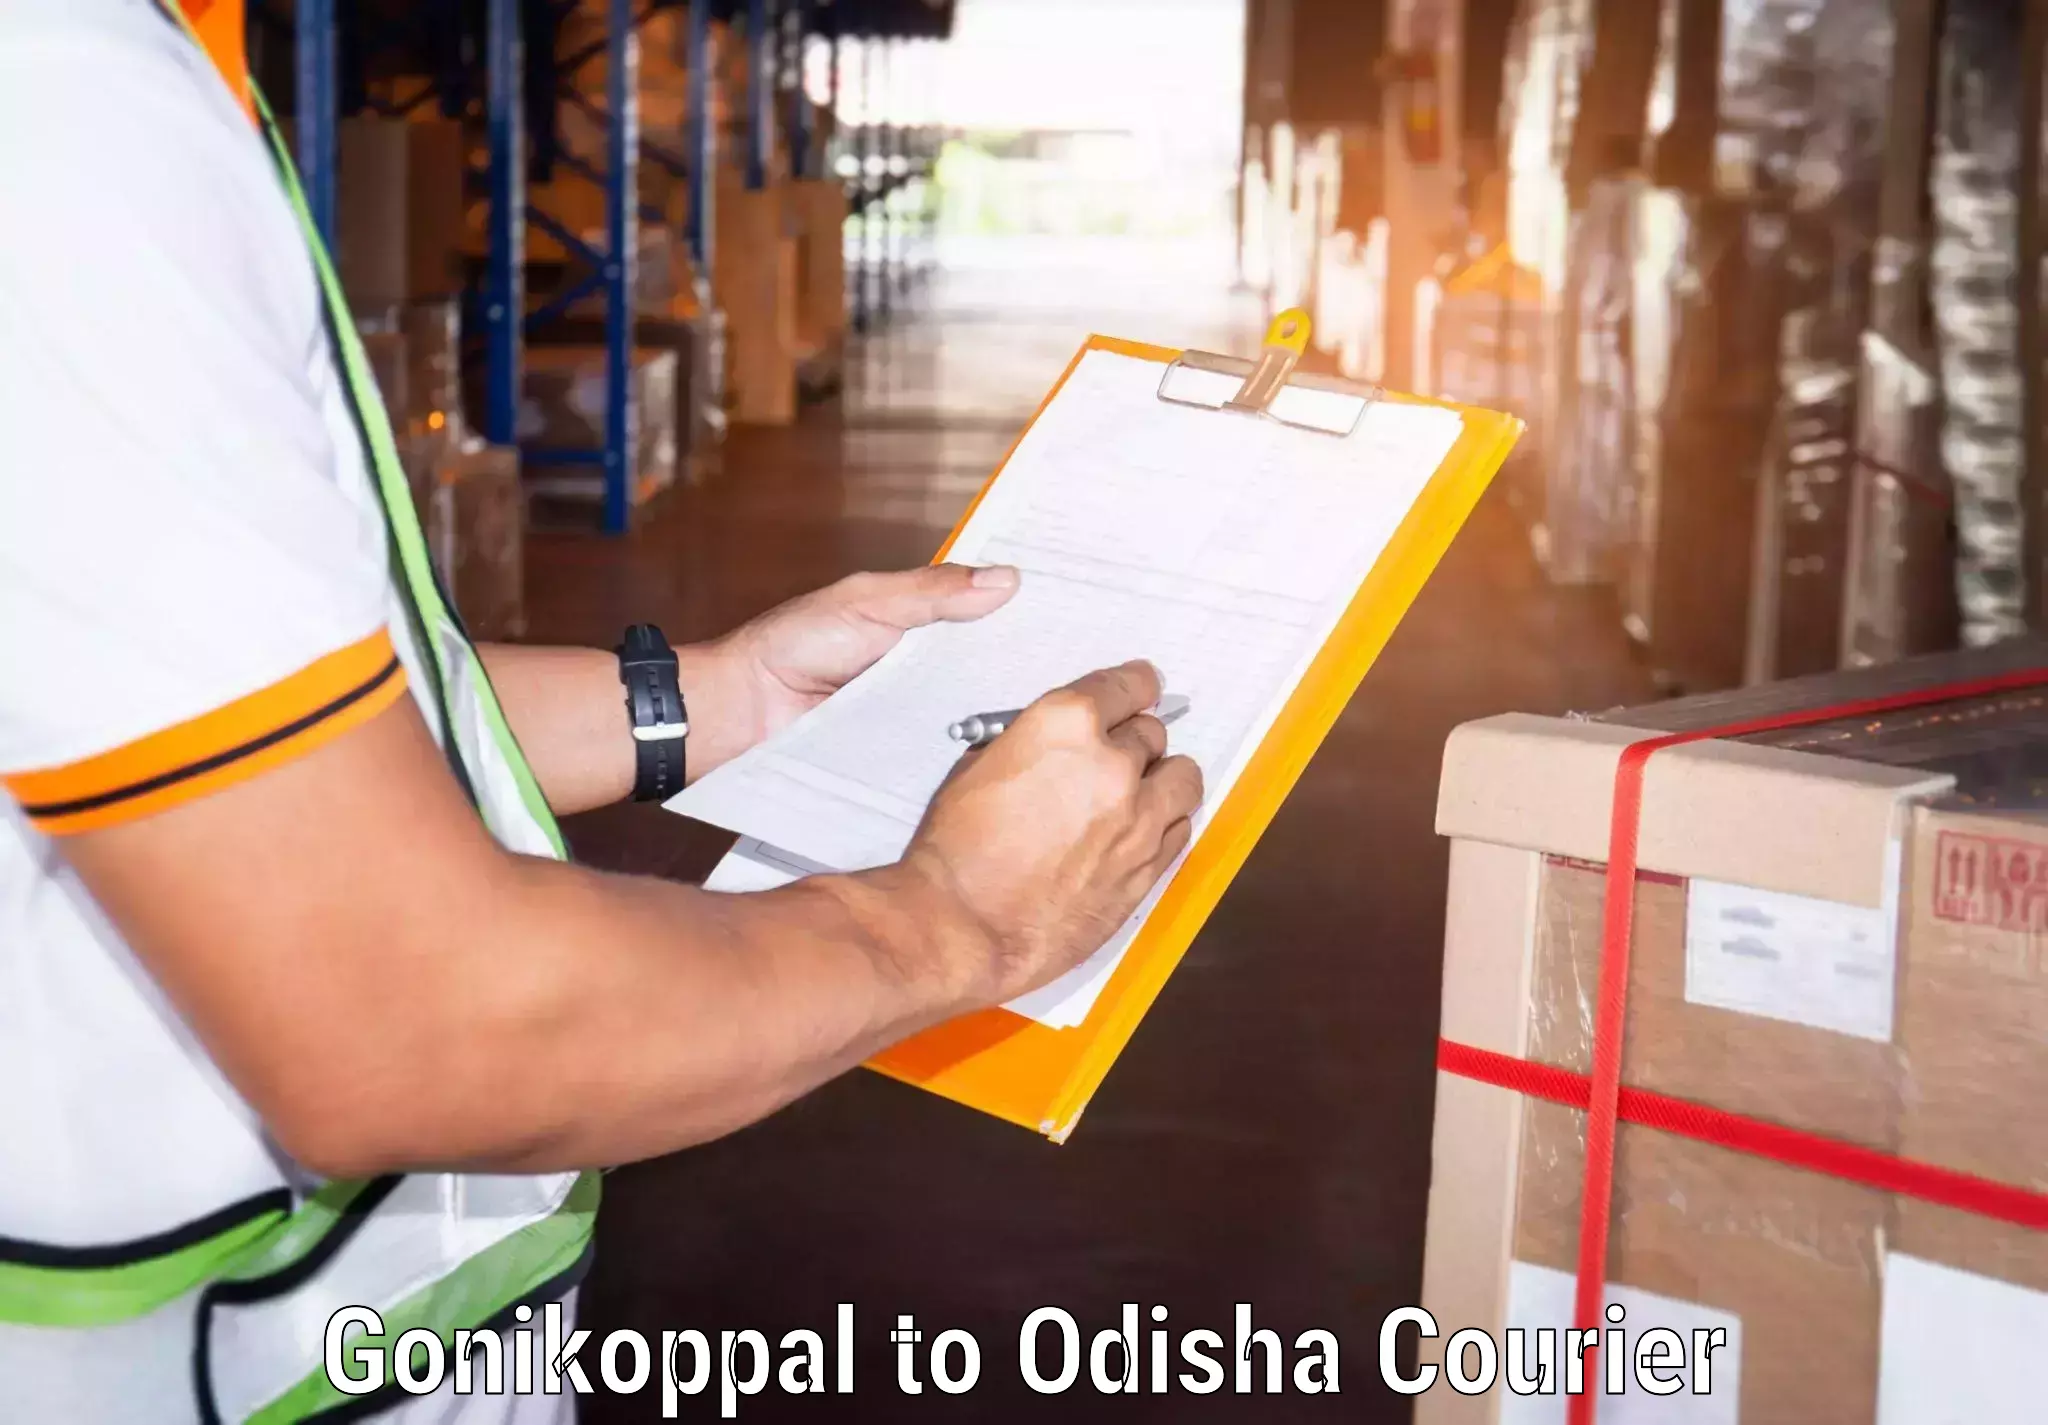 Package delivery network Gonikoppal to Asika